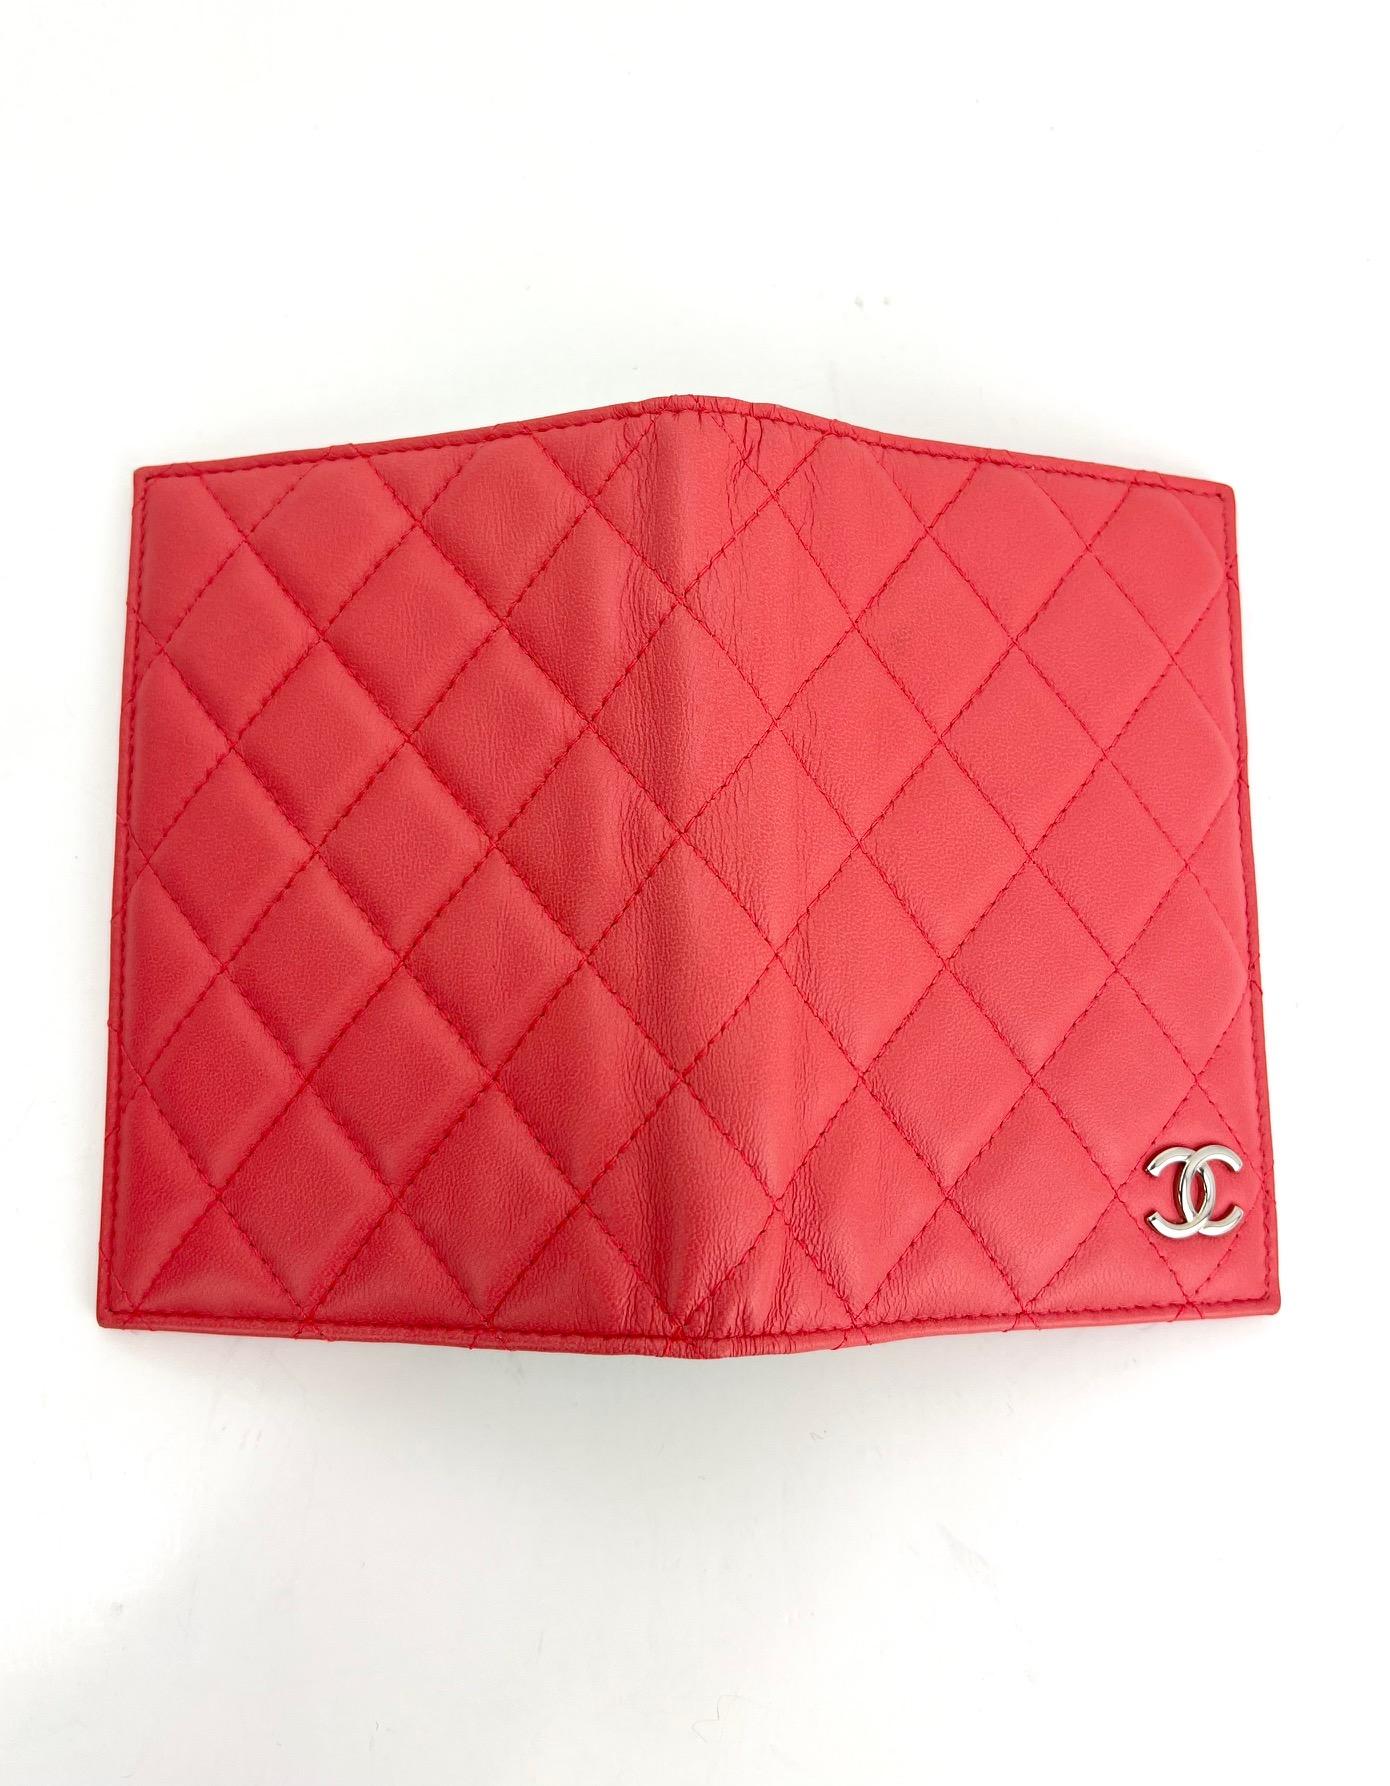 CHANEL Passport Holder Coral Quilted Calfskin Leather Wallet  8